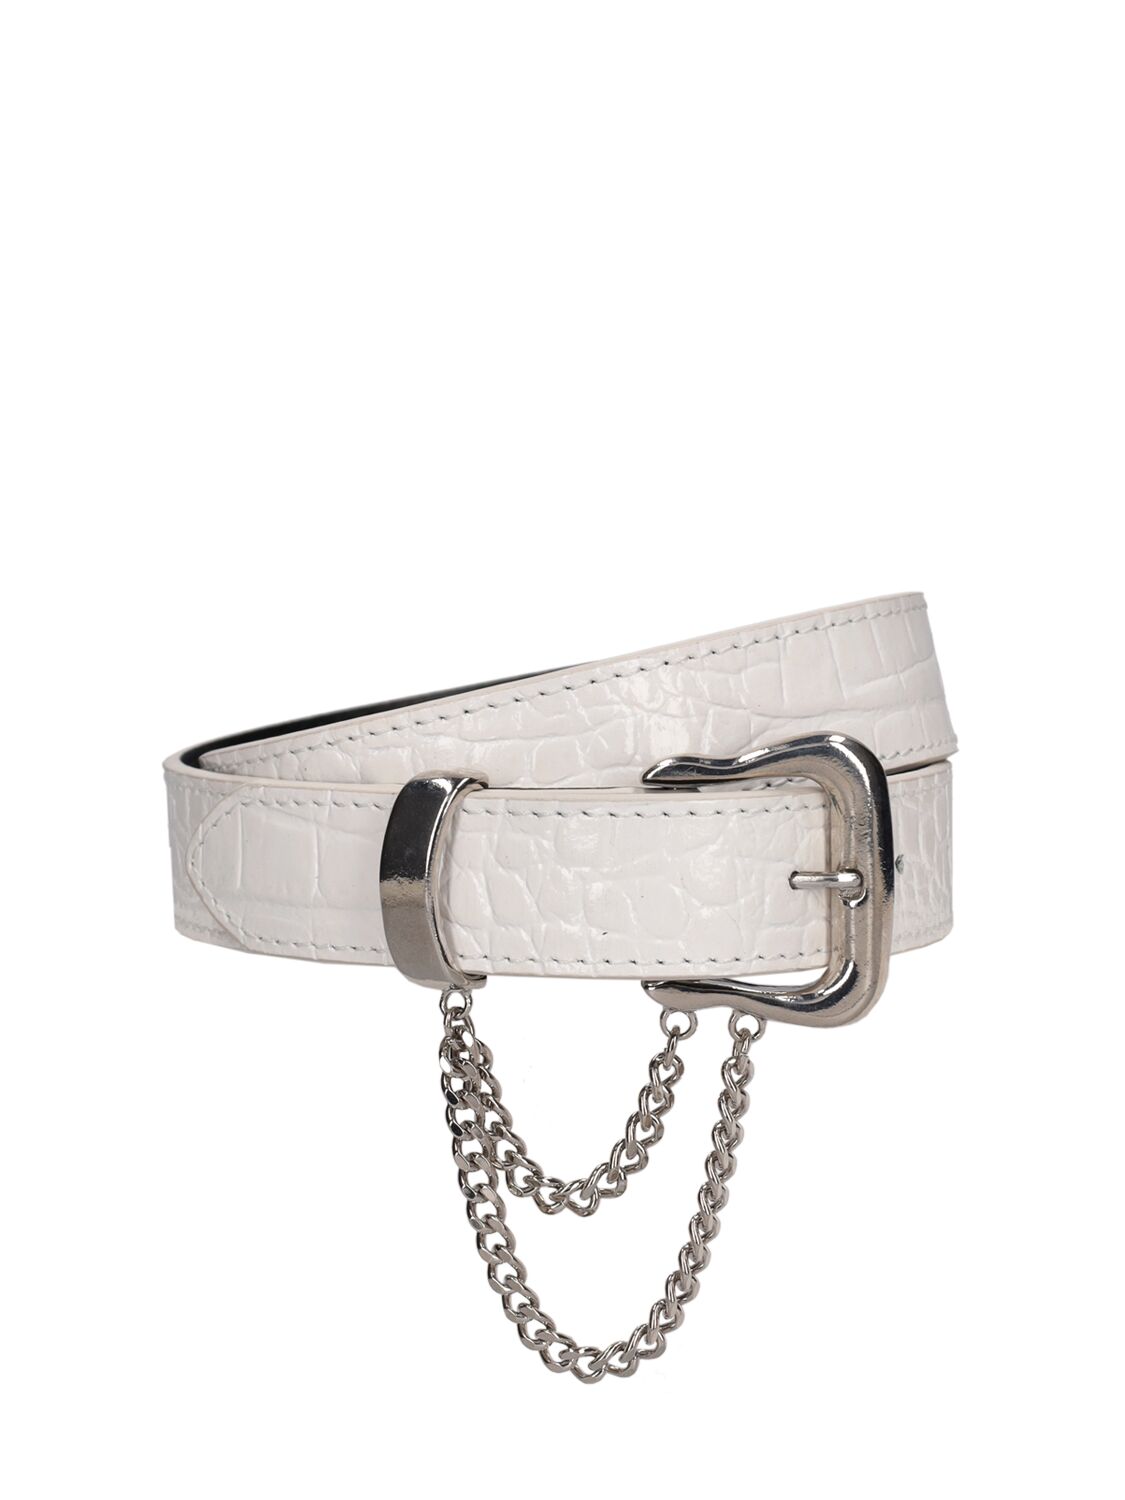 Alessandra Rich Embossed Leather Belt W/ Chain In White,silver